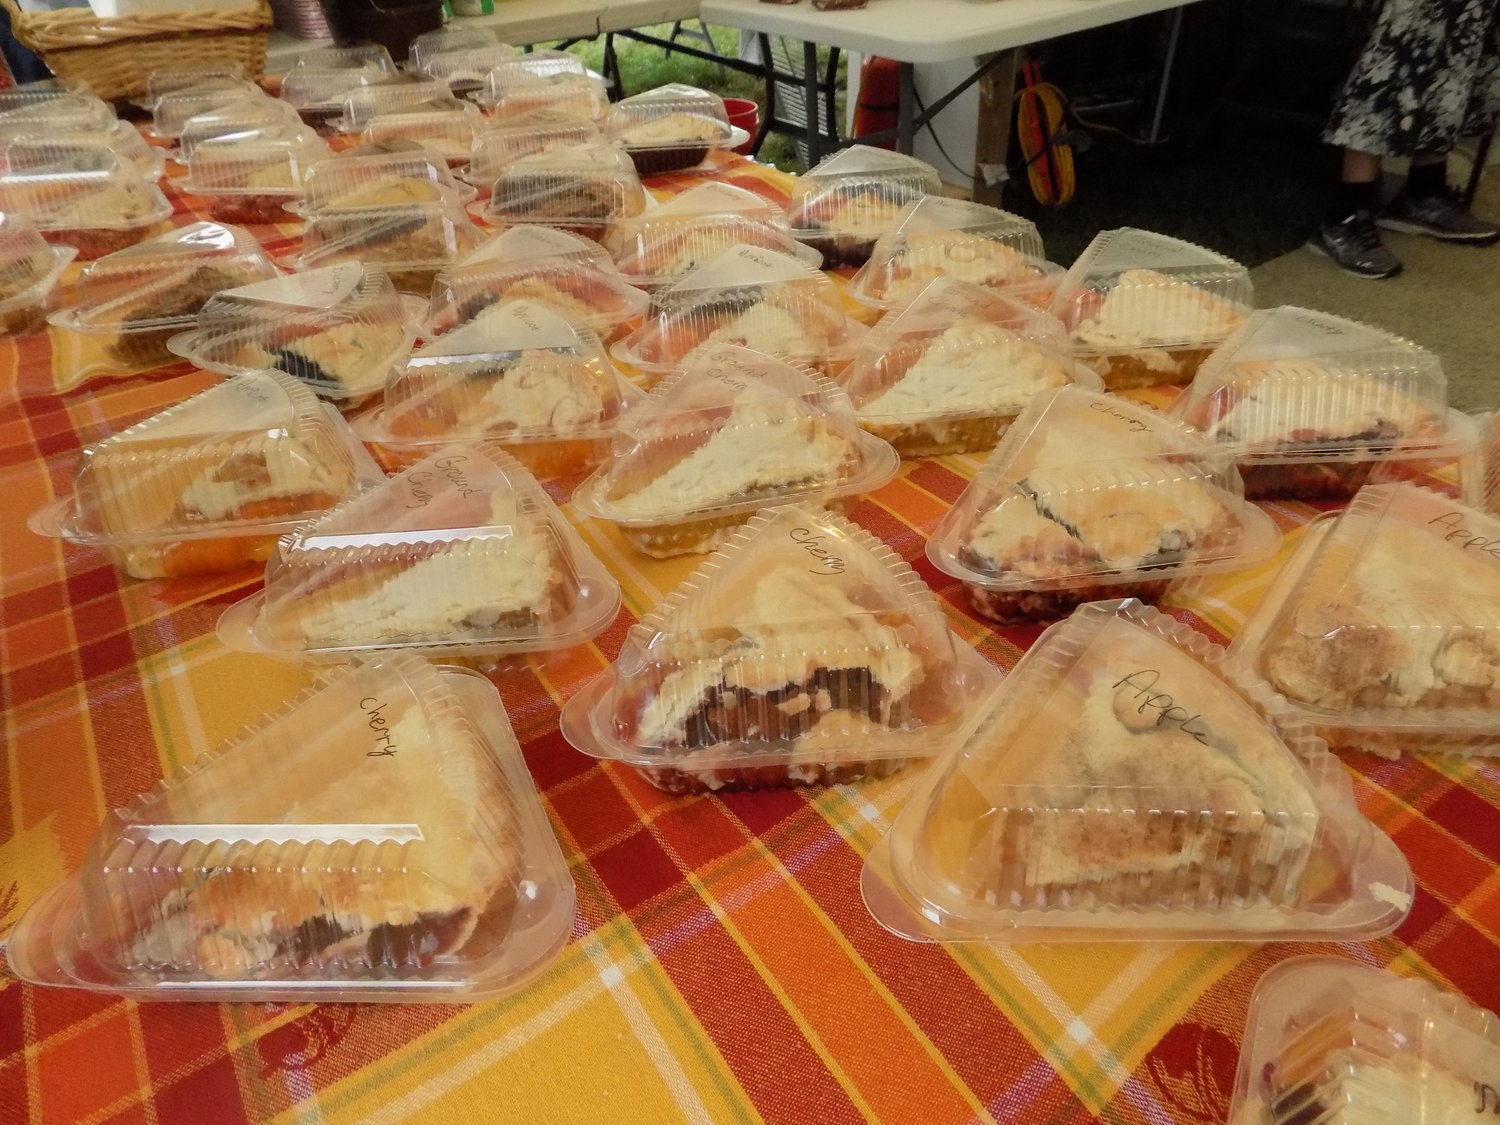 A full selection of pie slices were available from Fairview Mennonite Church.